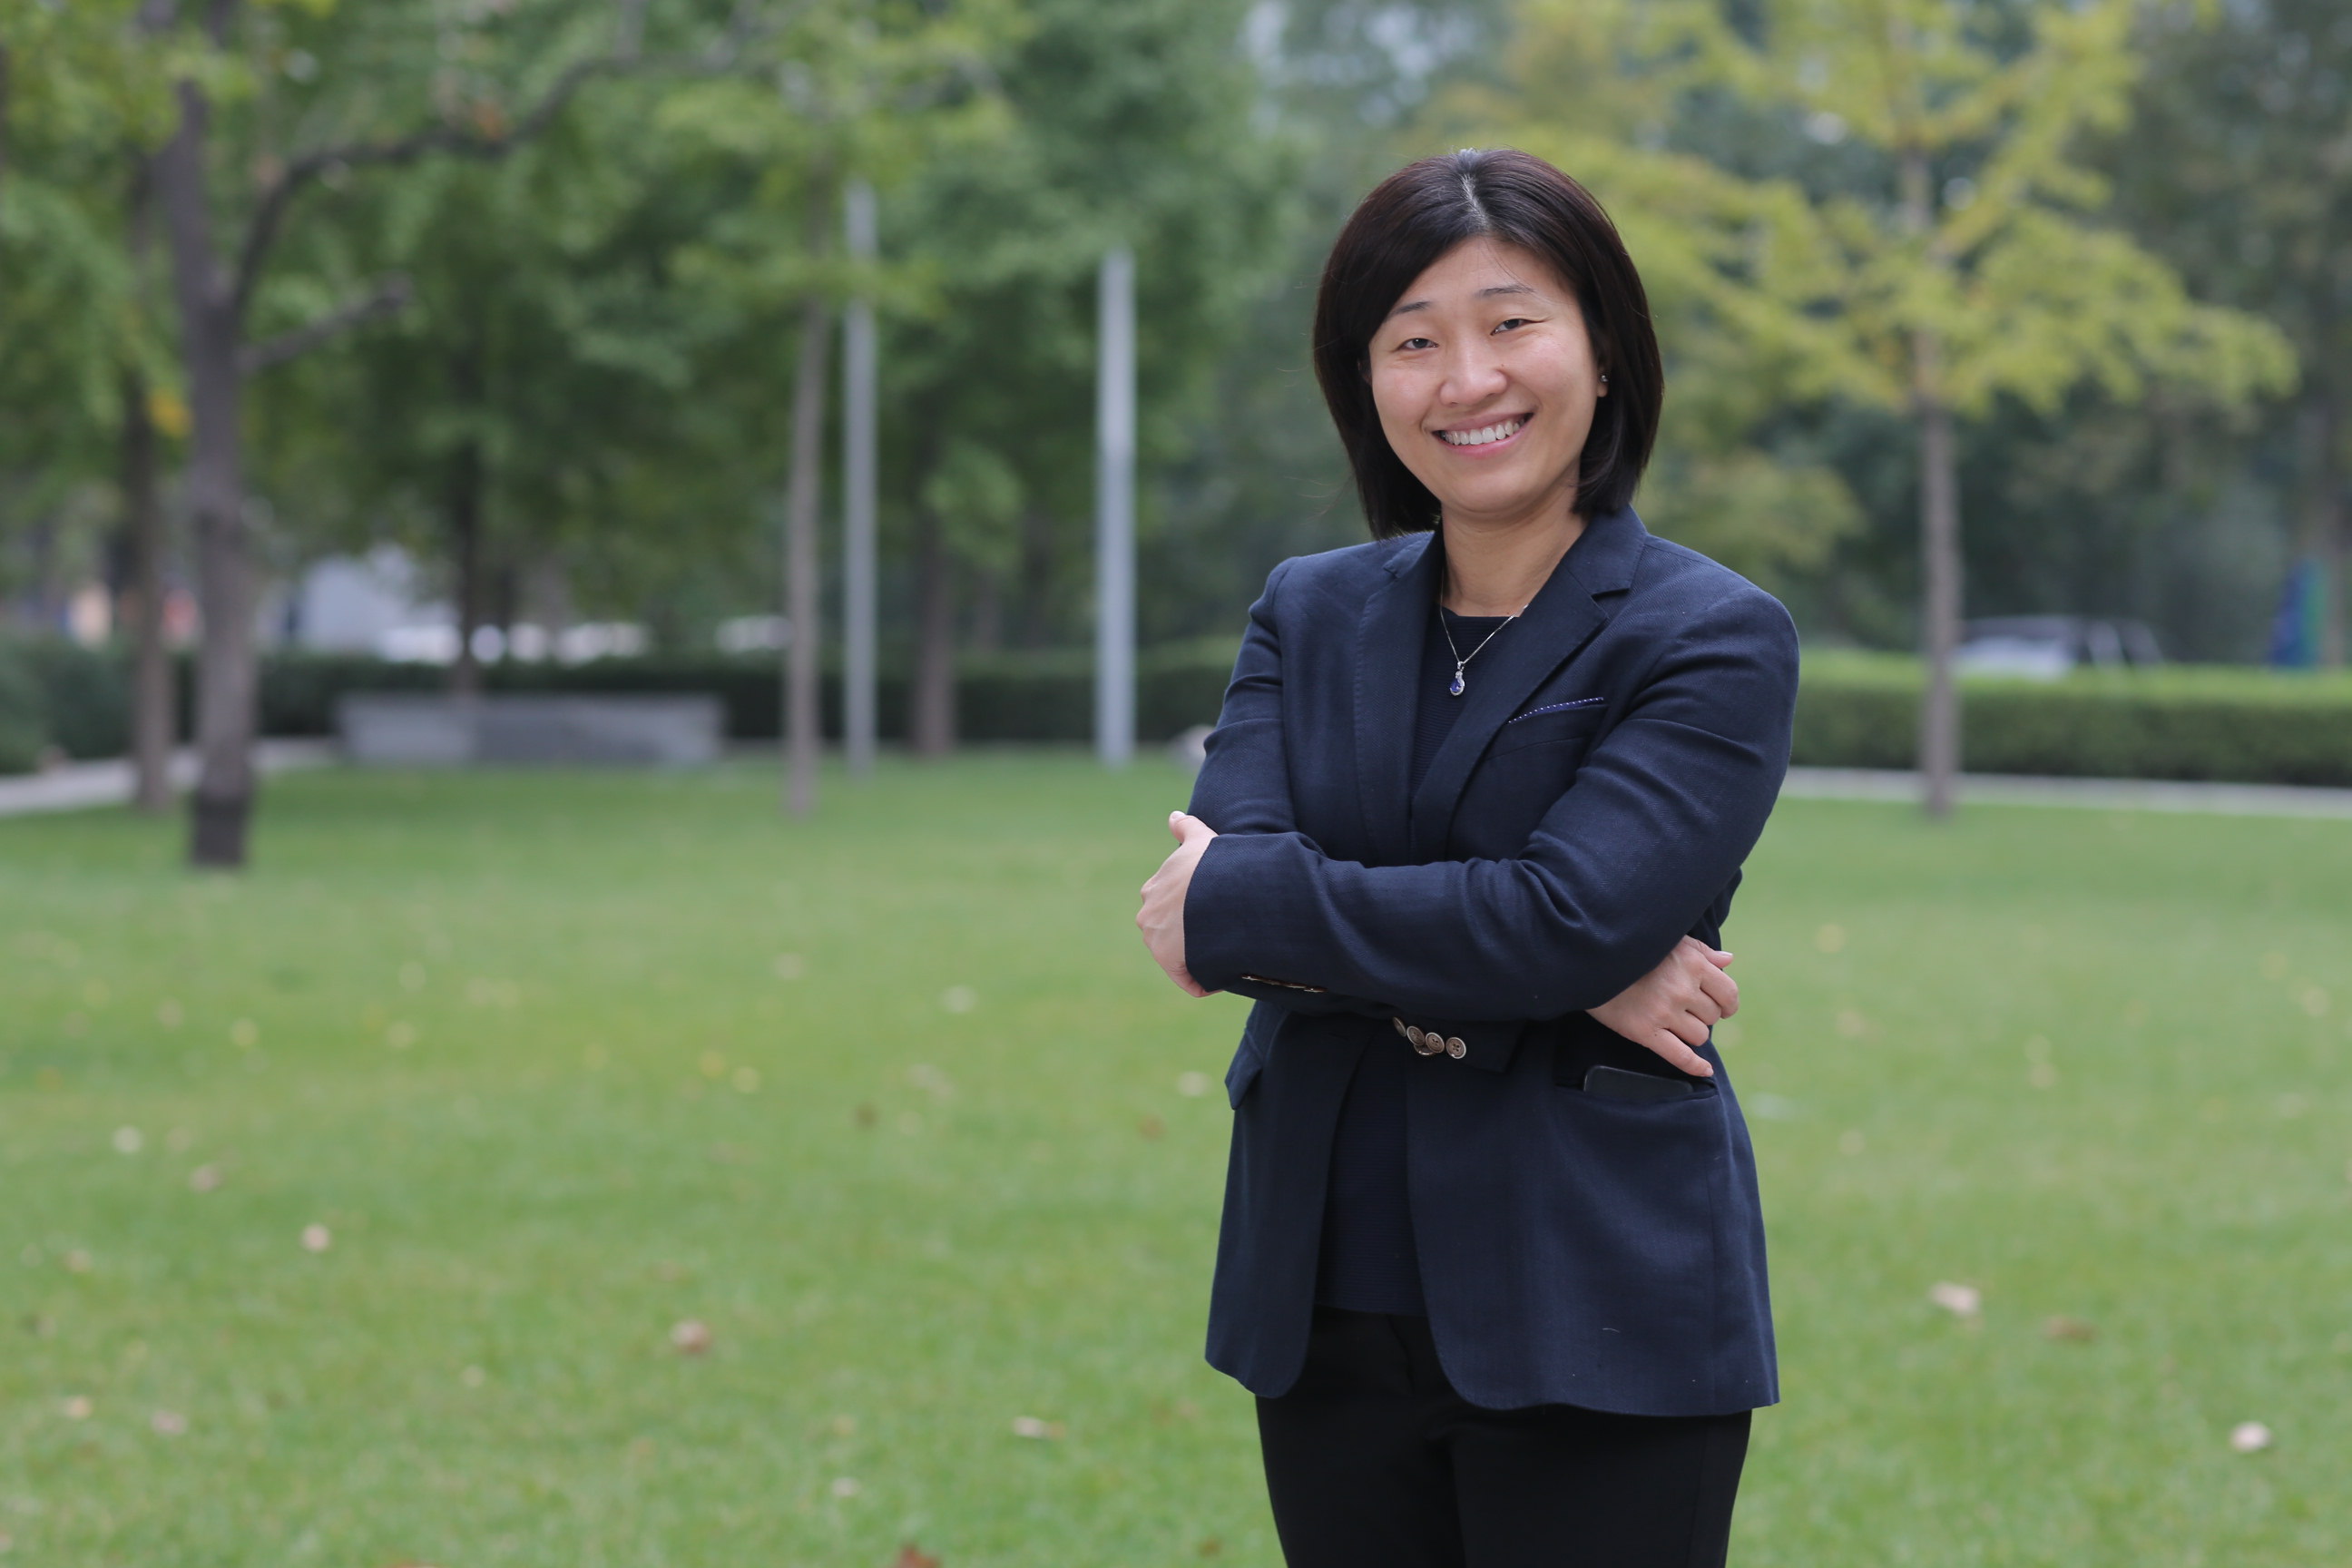 Through the lens of VC | GGV Capital’s Jenny Lee on unicorn traits and more